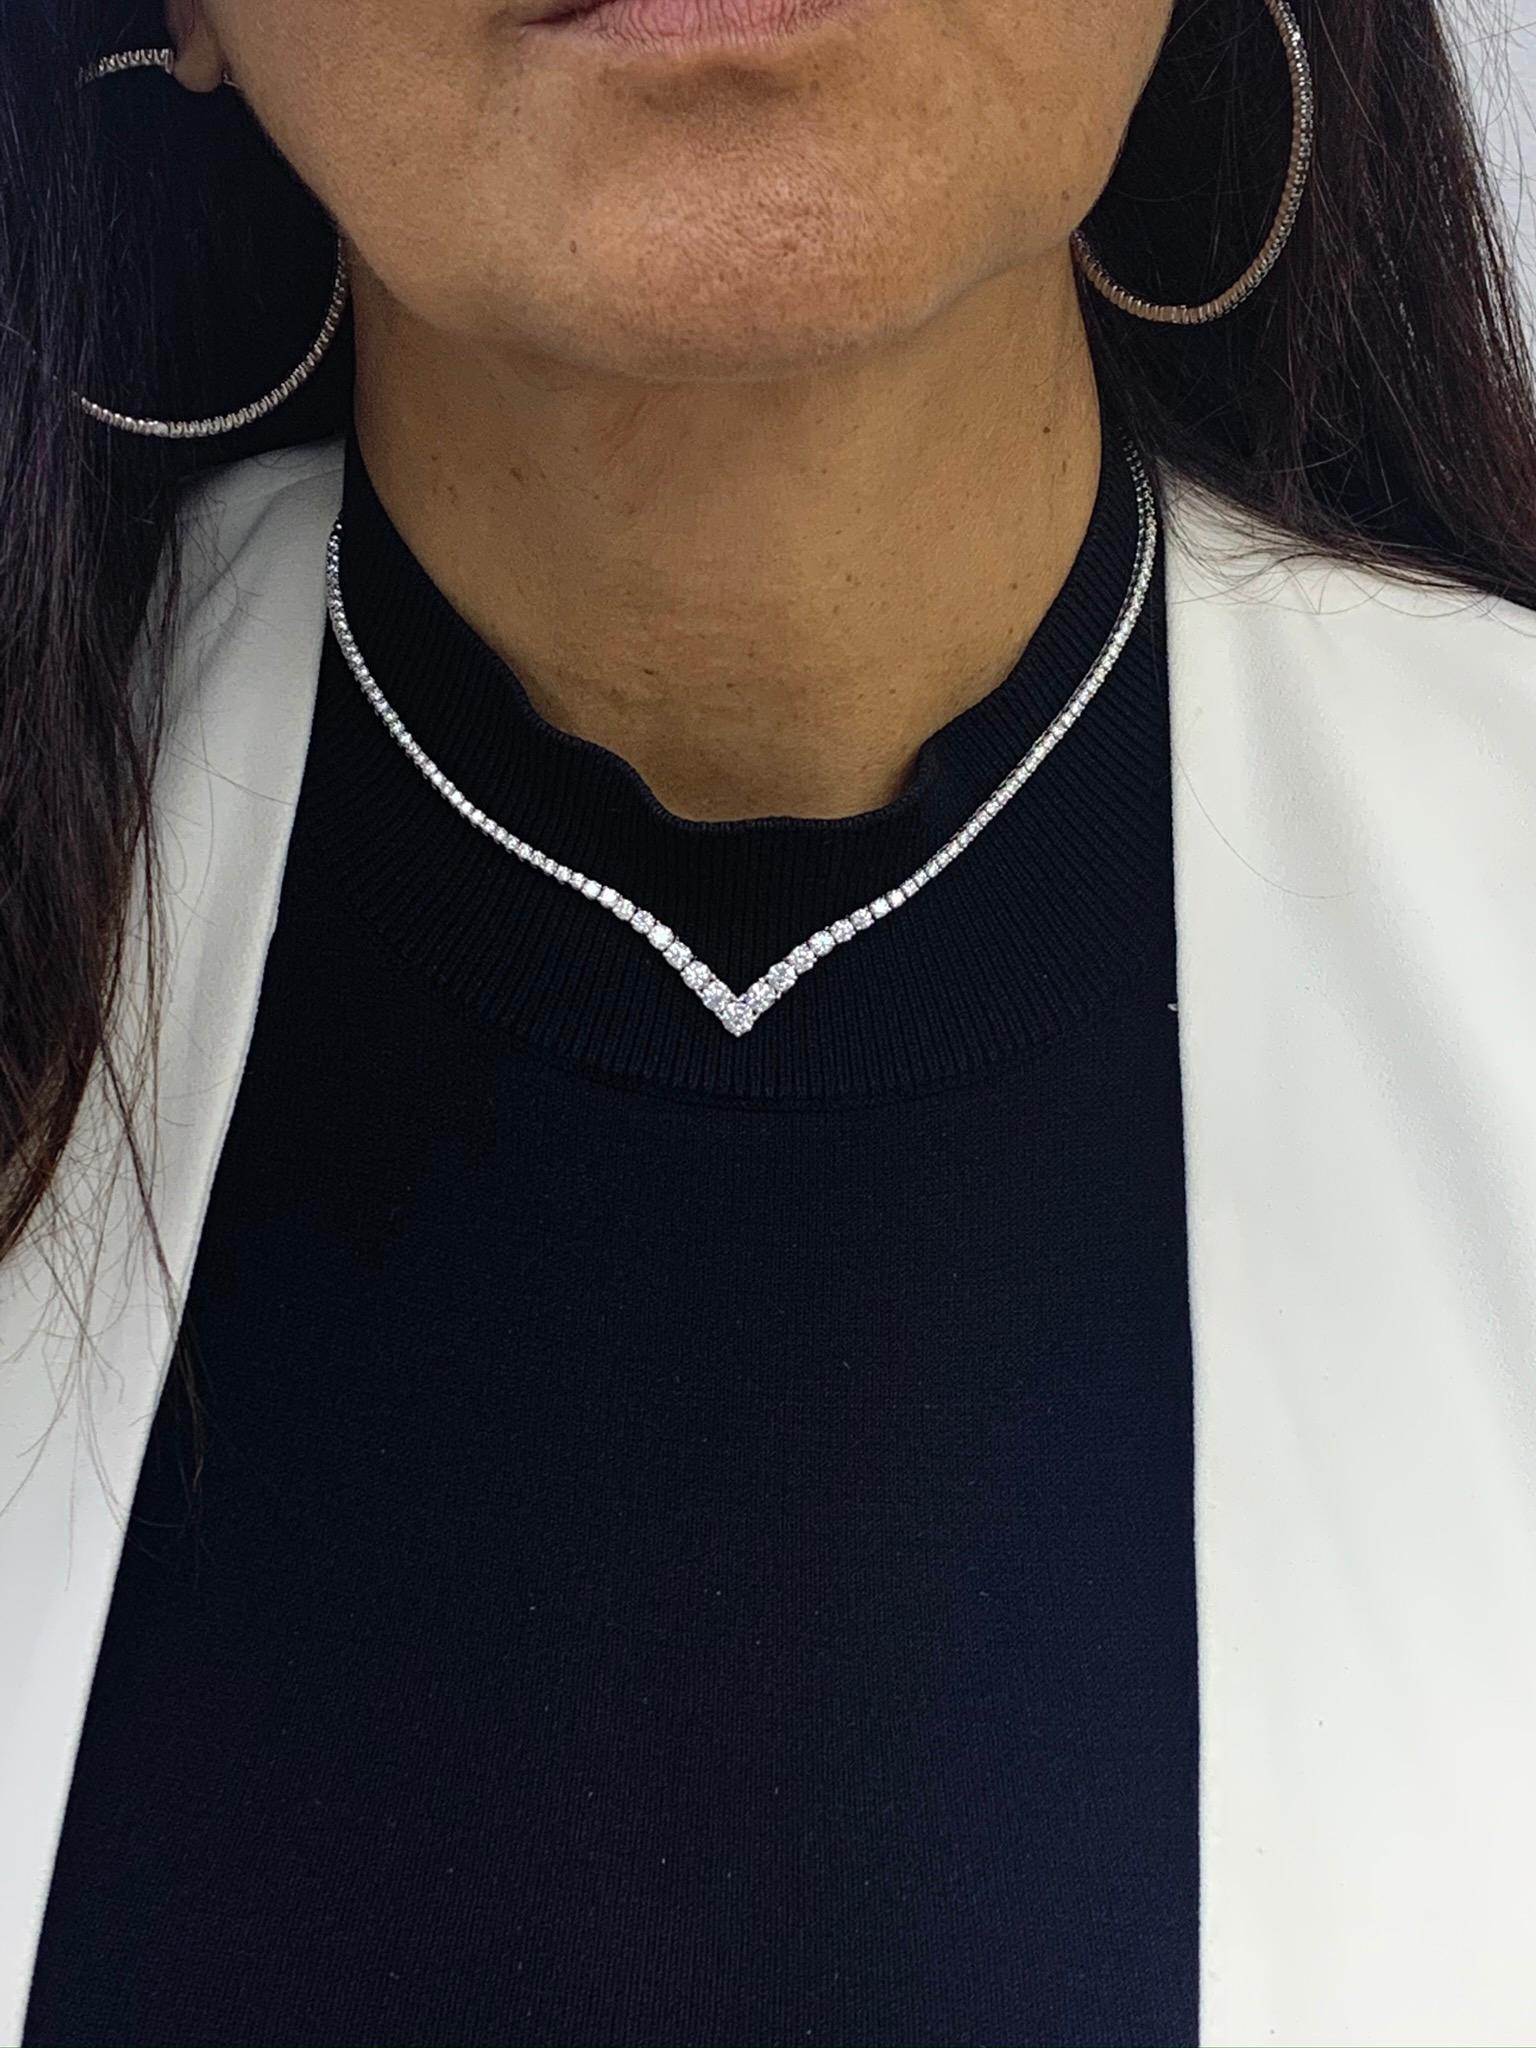 A simple yet very brilliant piece showcasing round diamonds that elegantly graduate larger as it reaches the center of the necklace. 85 Diamonds weigh 5.05 carats total and are very fine quality Made in 14k White Gold. 17 inches in length. Box Clasp